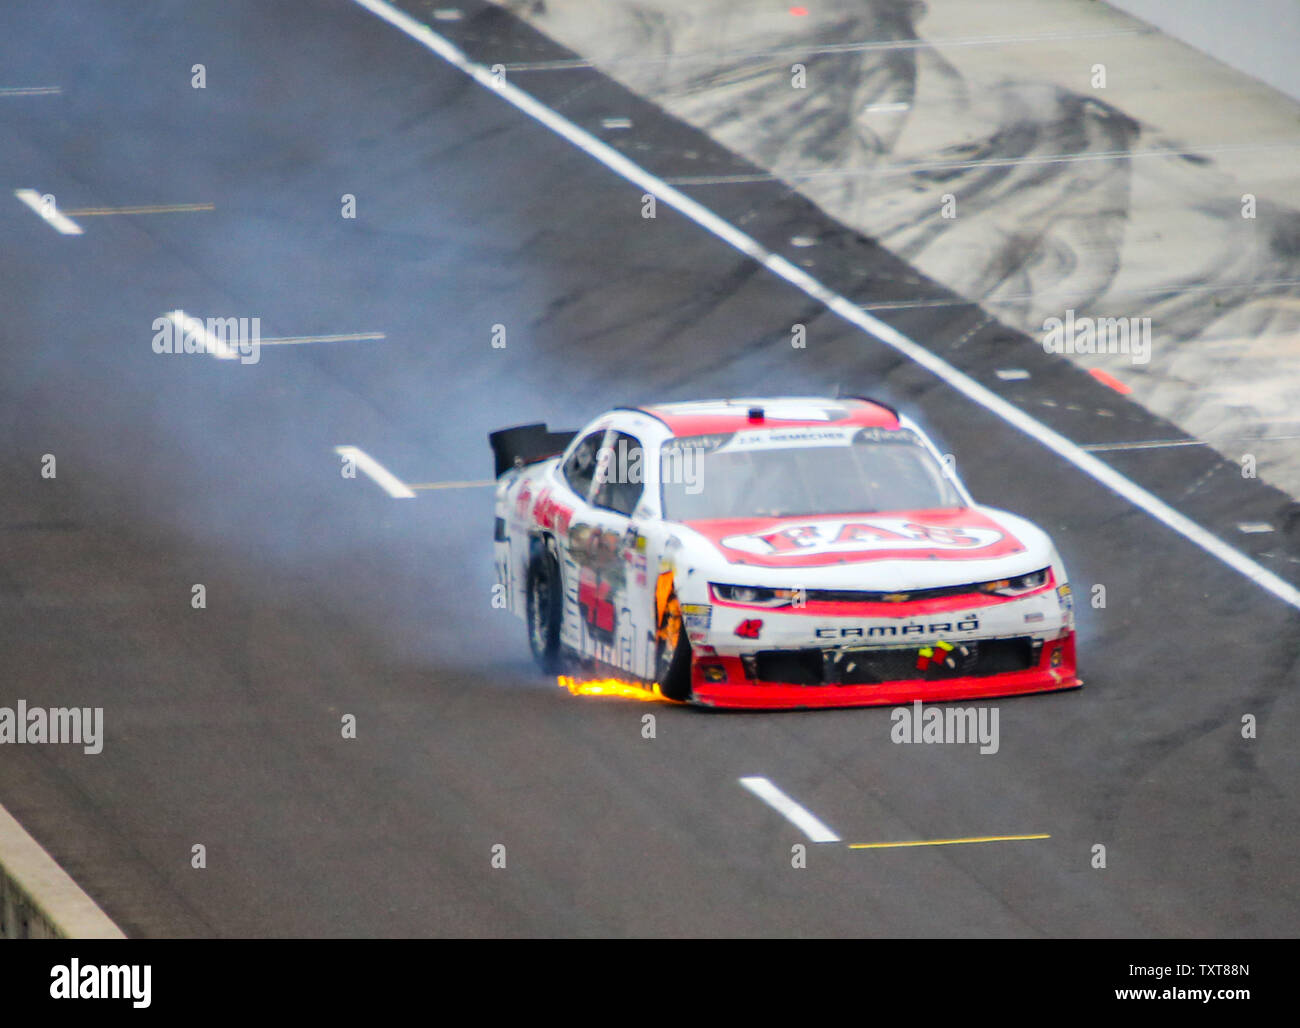 John Hunter Nemechek, Driver #42 Chip Ganassi Racing Chevrolet, on fire in Pit lane after he hit the wall during the 2018 Xfinity Series LILLY/Diabetes 250 at the Brickyard, at the Indianapolis Motor Speedway on September 10, 2018 in Indianapolis, Indiana. Photo by Mike GentryUPI Stock Photo